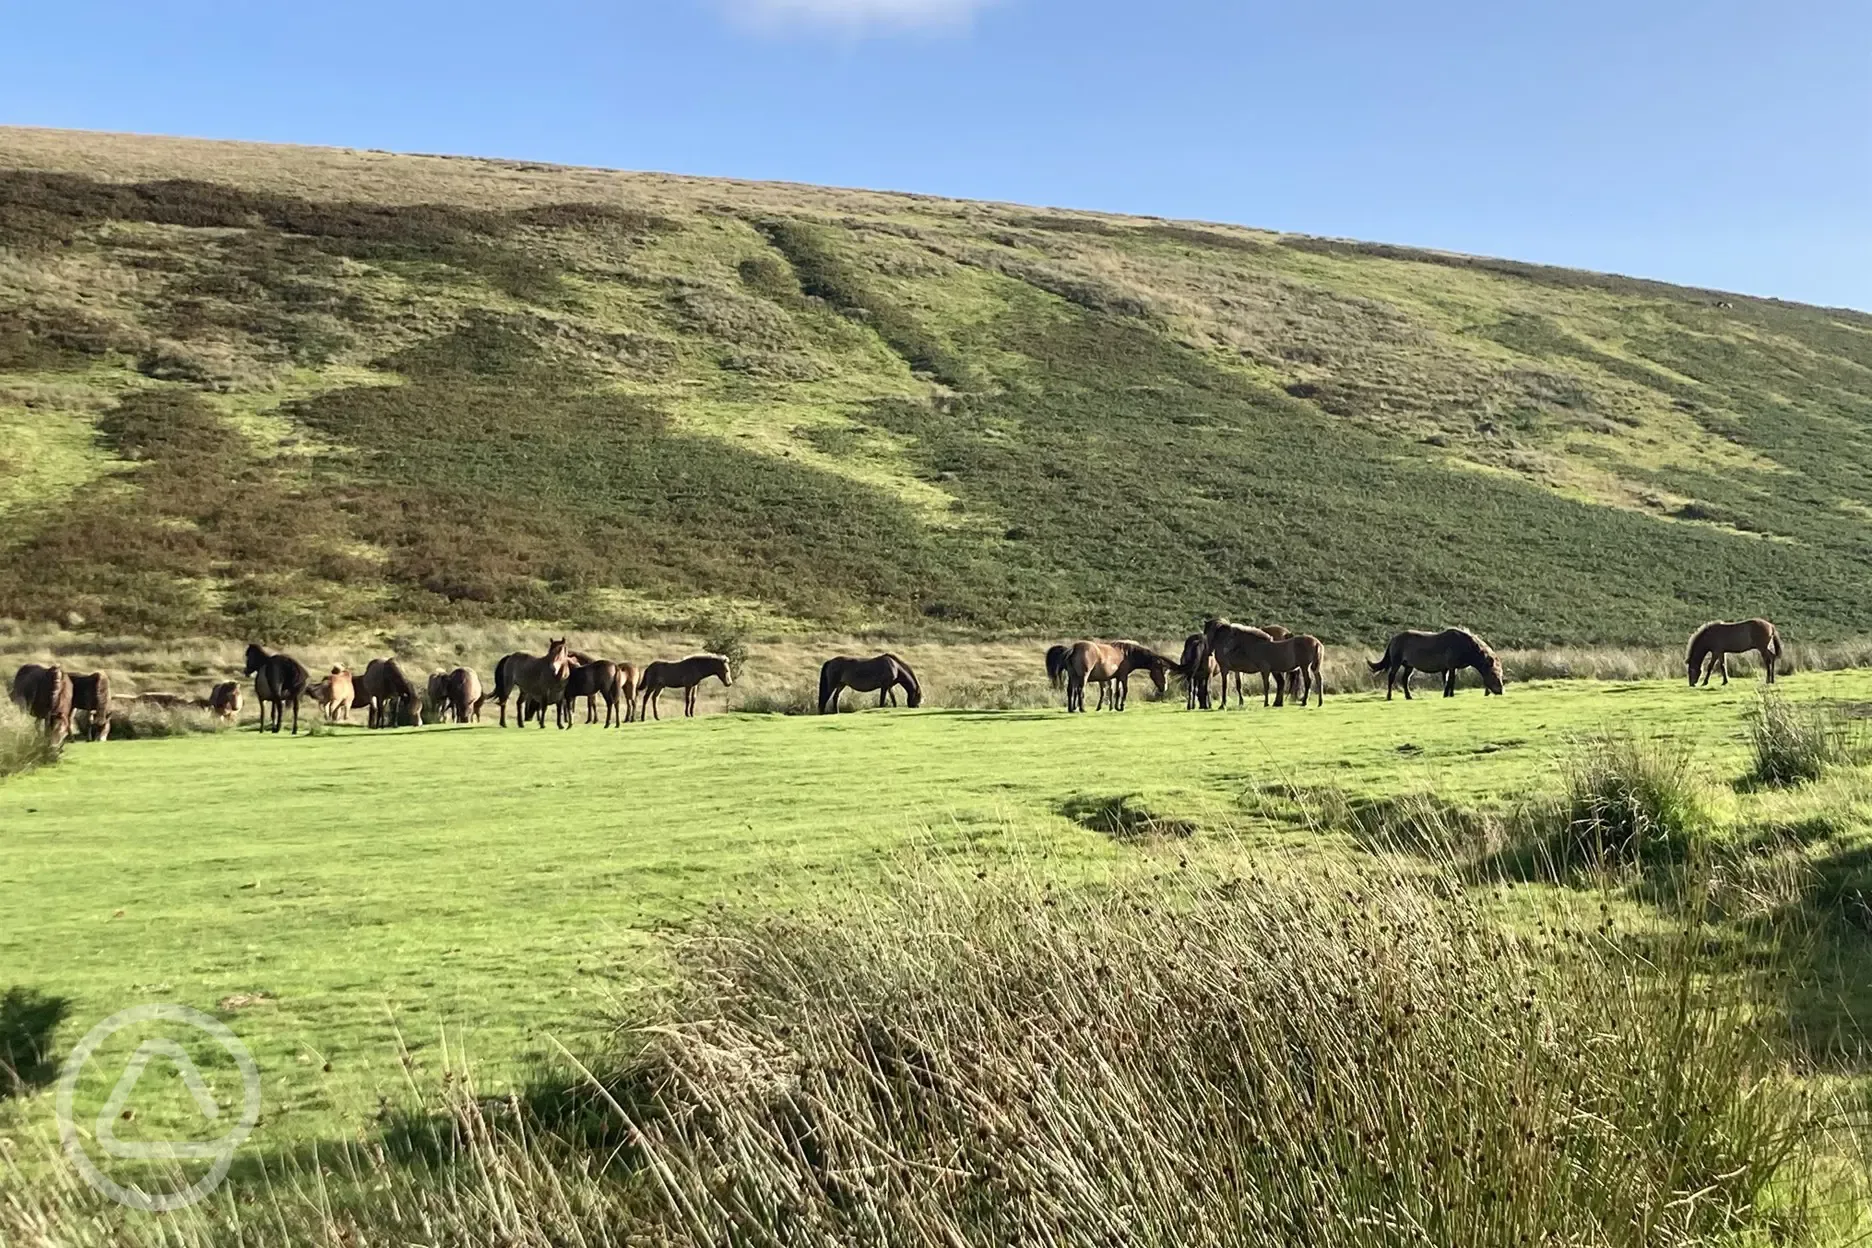 Head to Exmoor and you may be lucky enough to see the Exmoor ponies